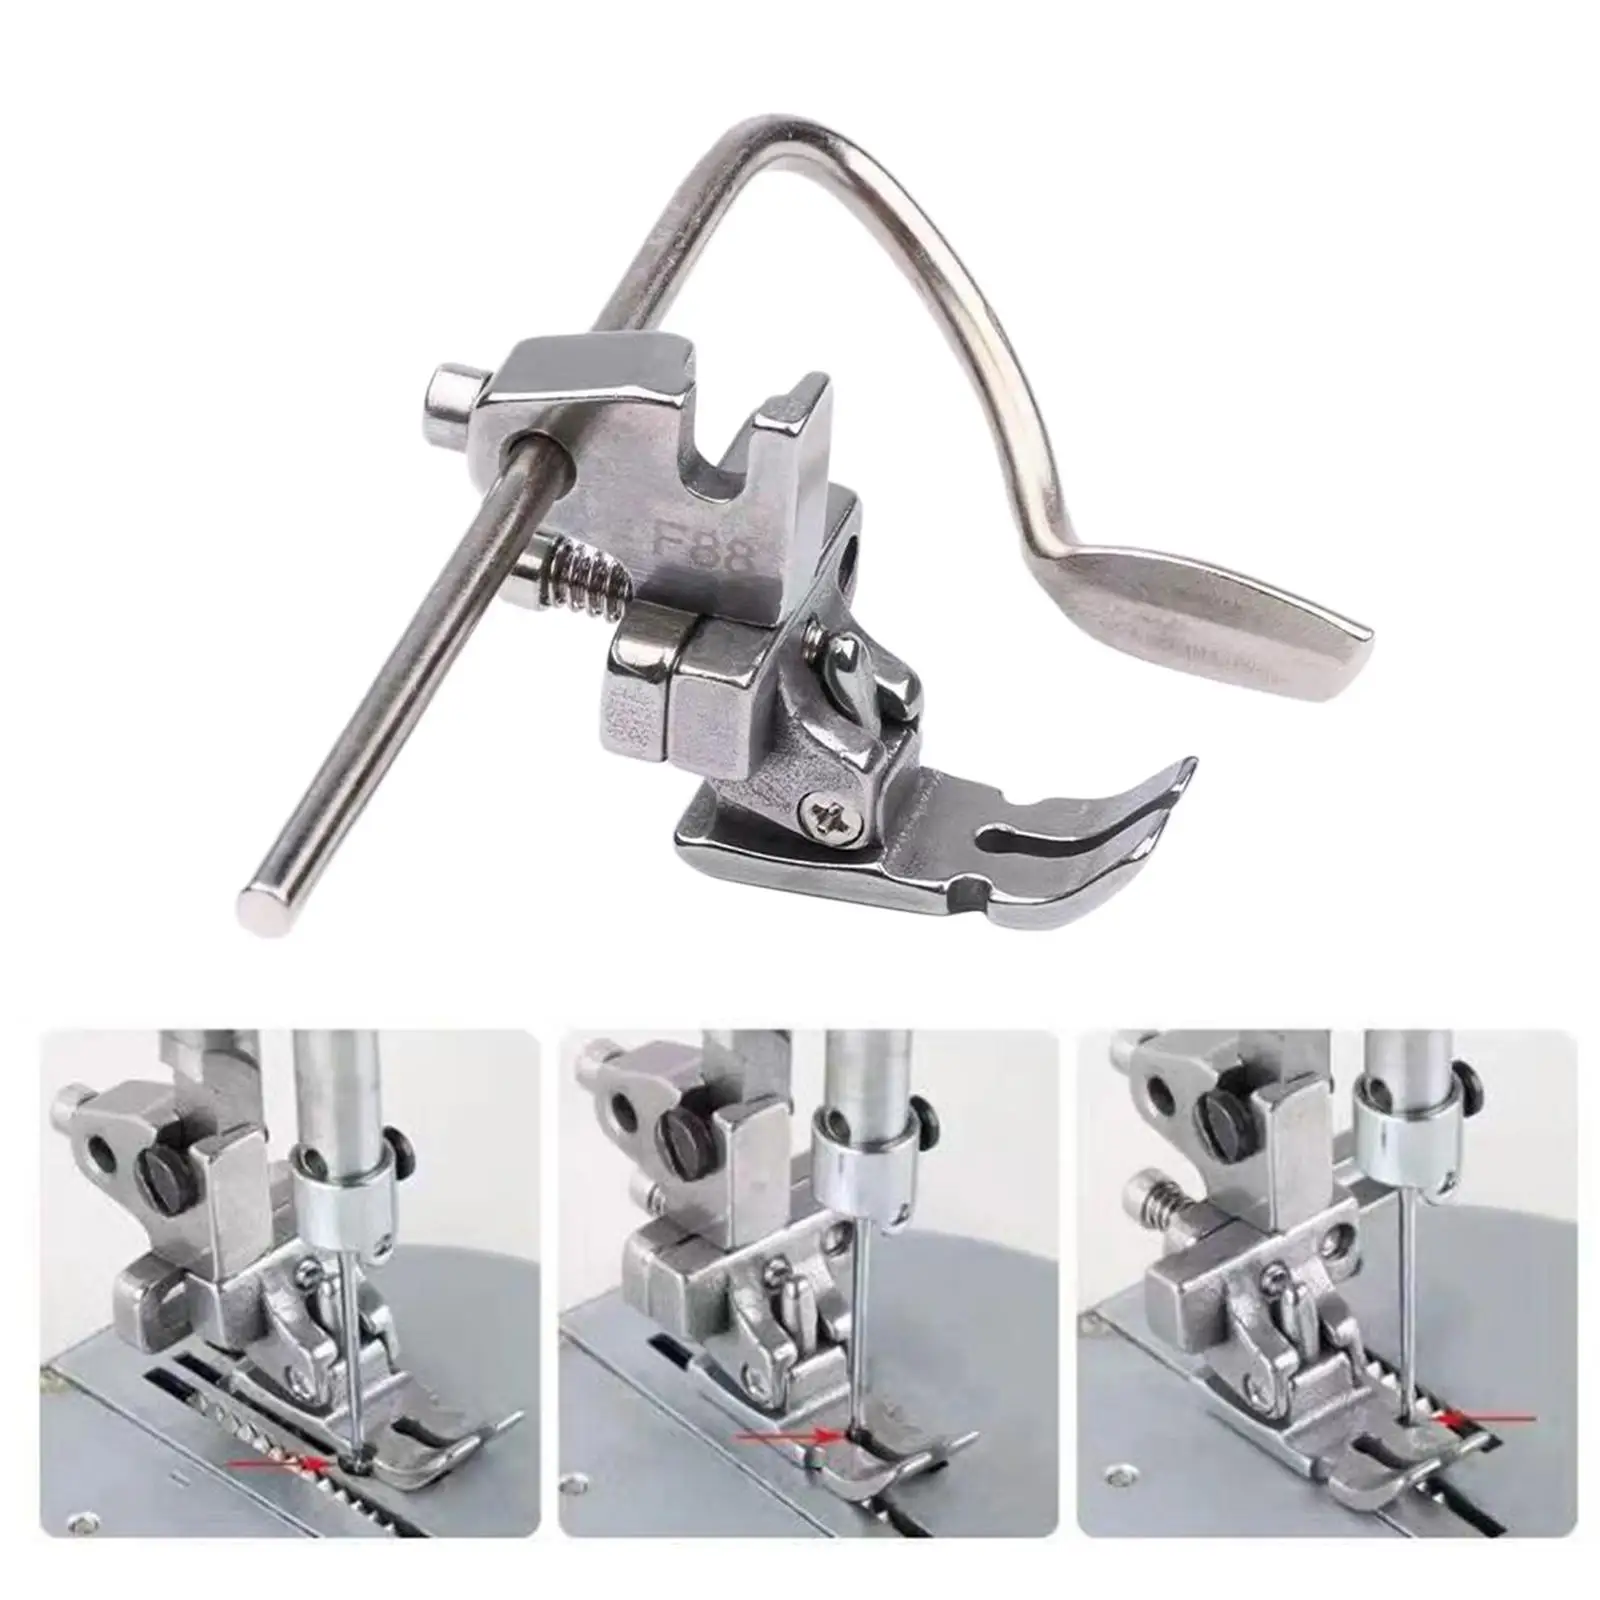 Presser Foot for Sewing Machine for DIY Arts Crafts Embroidery Machine